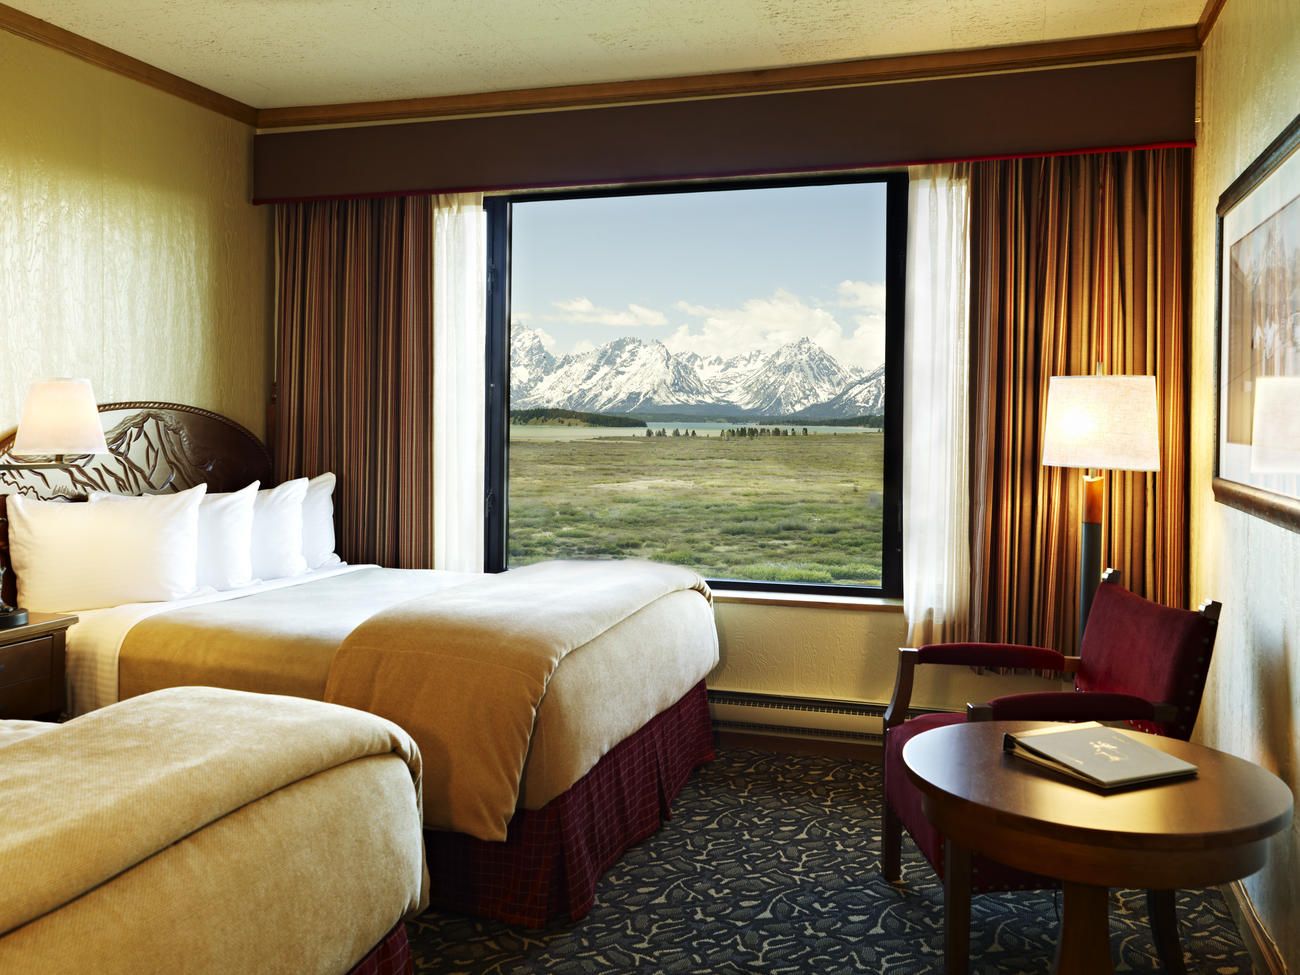 Grand Teton Hotels, Lodges, and Cabins